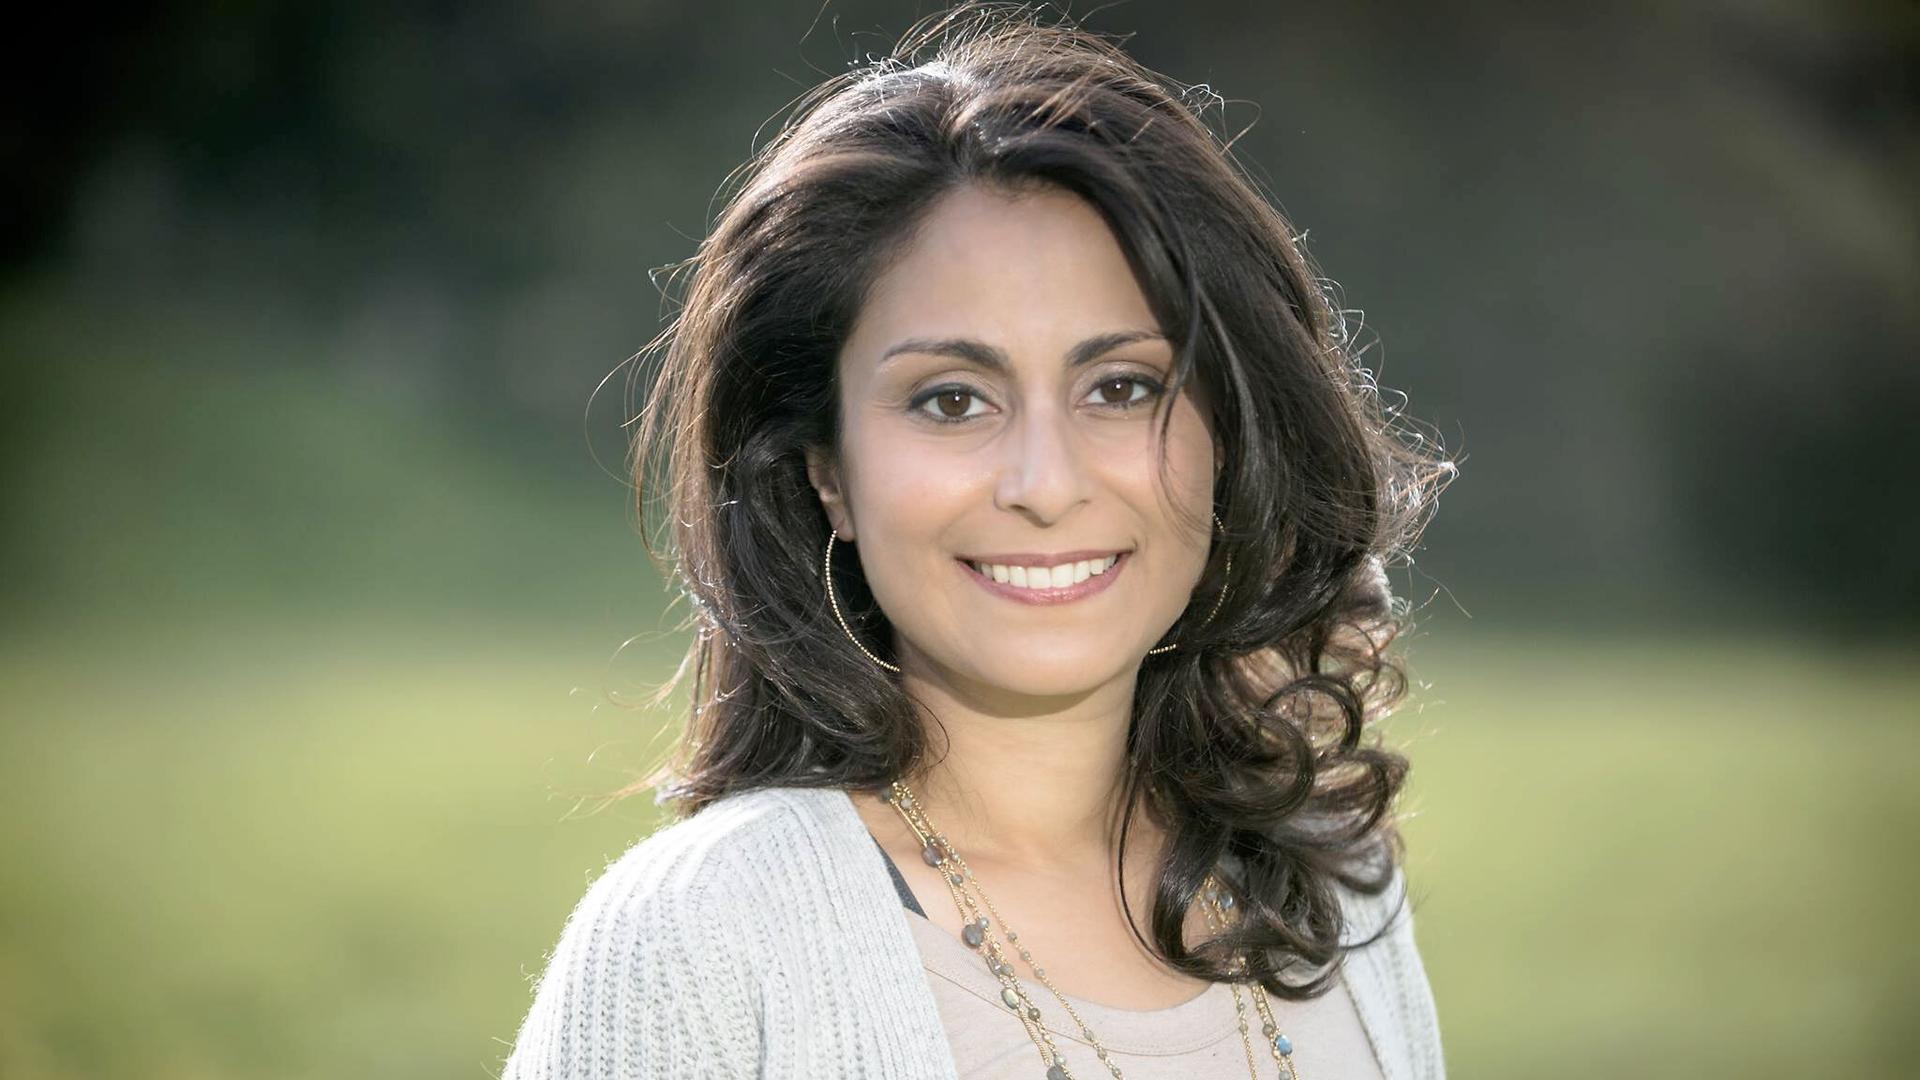 Dr. Céline Gounder has been named to President-elect Joe Biden's COVID-19 task force.